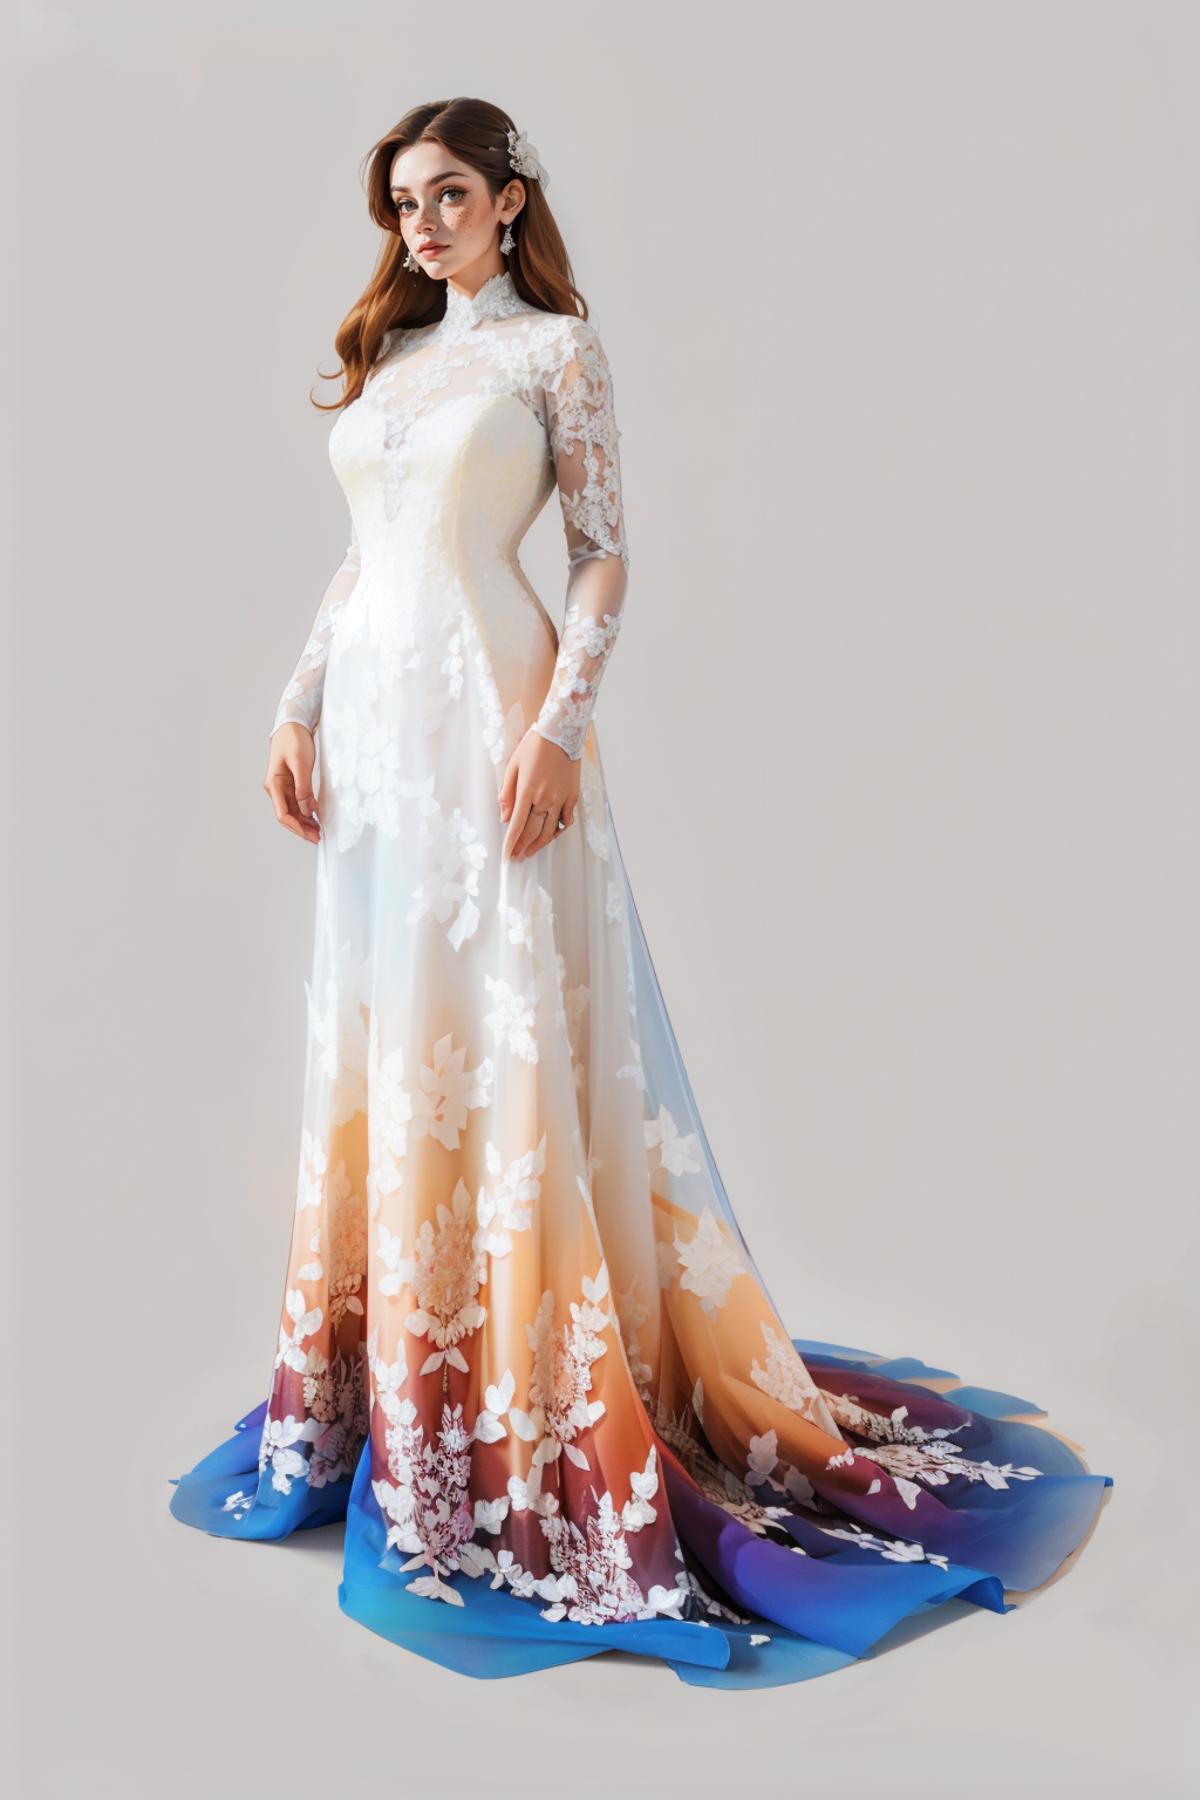 Sunrise Dipped Wedding Dress image by freckledvixon